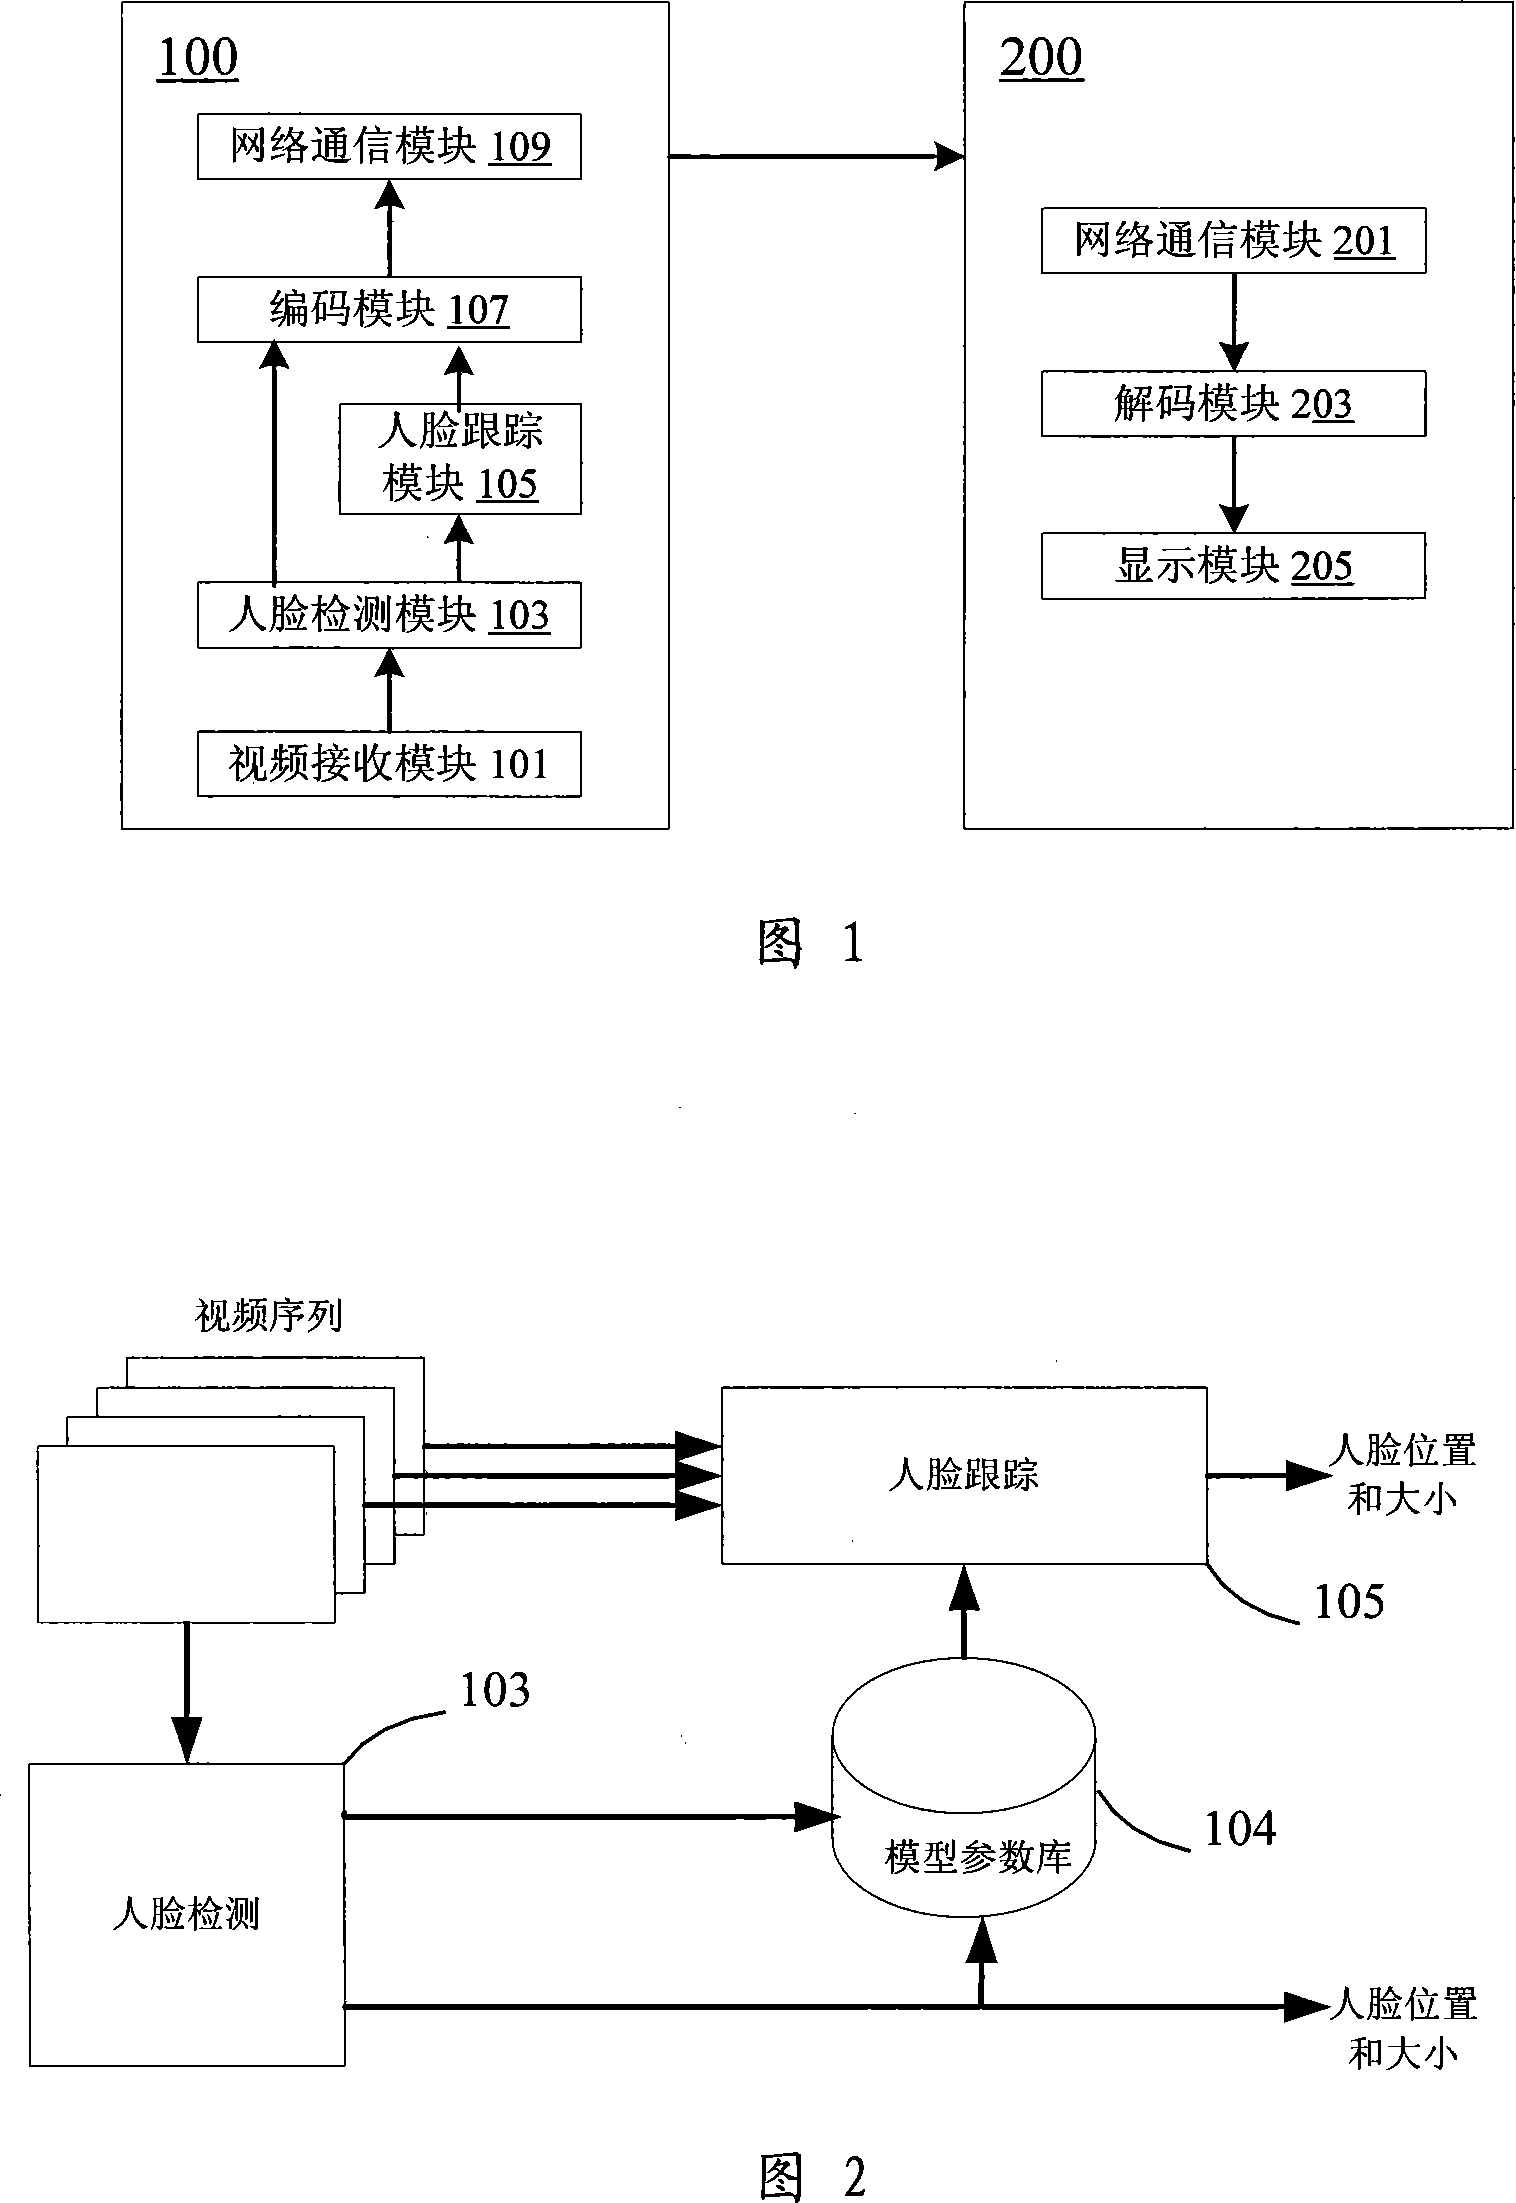 Video instant communication system and method